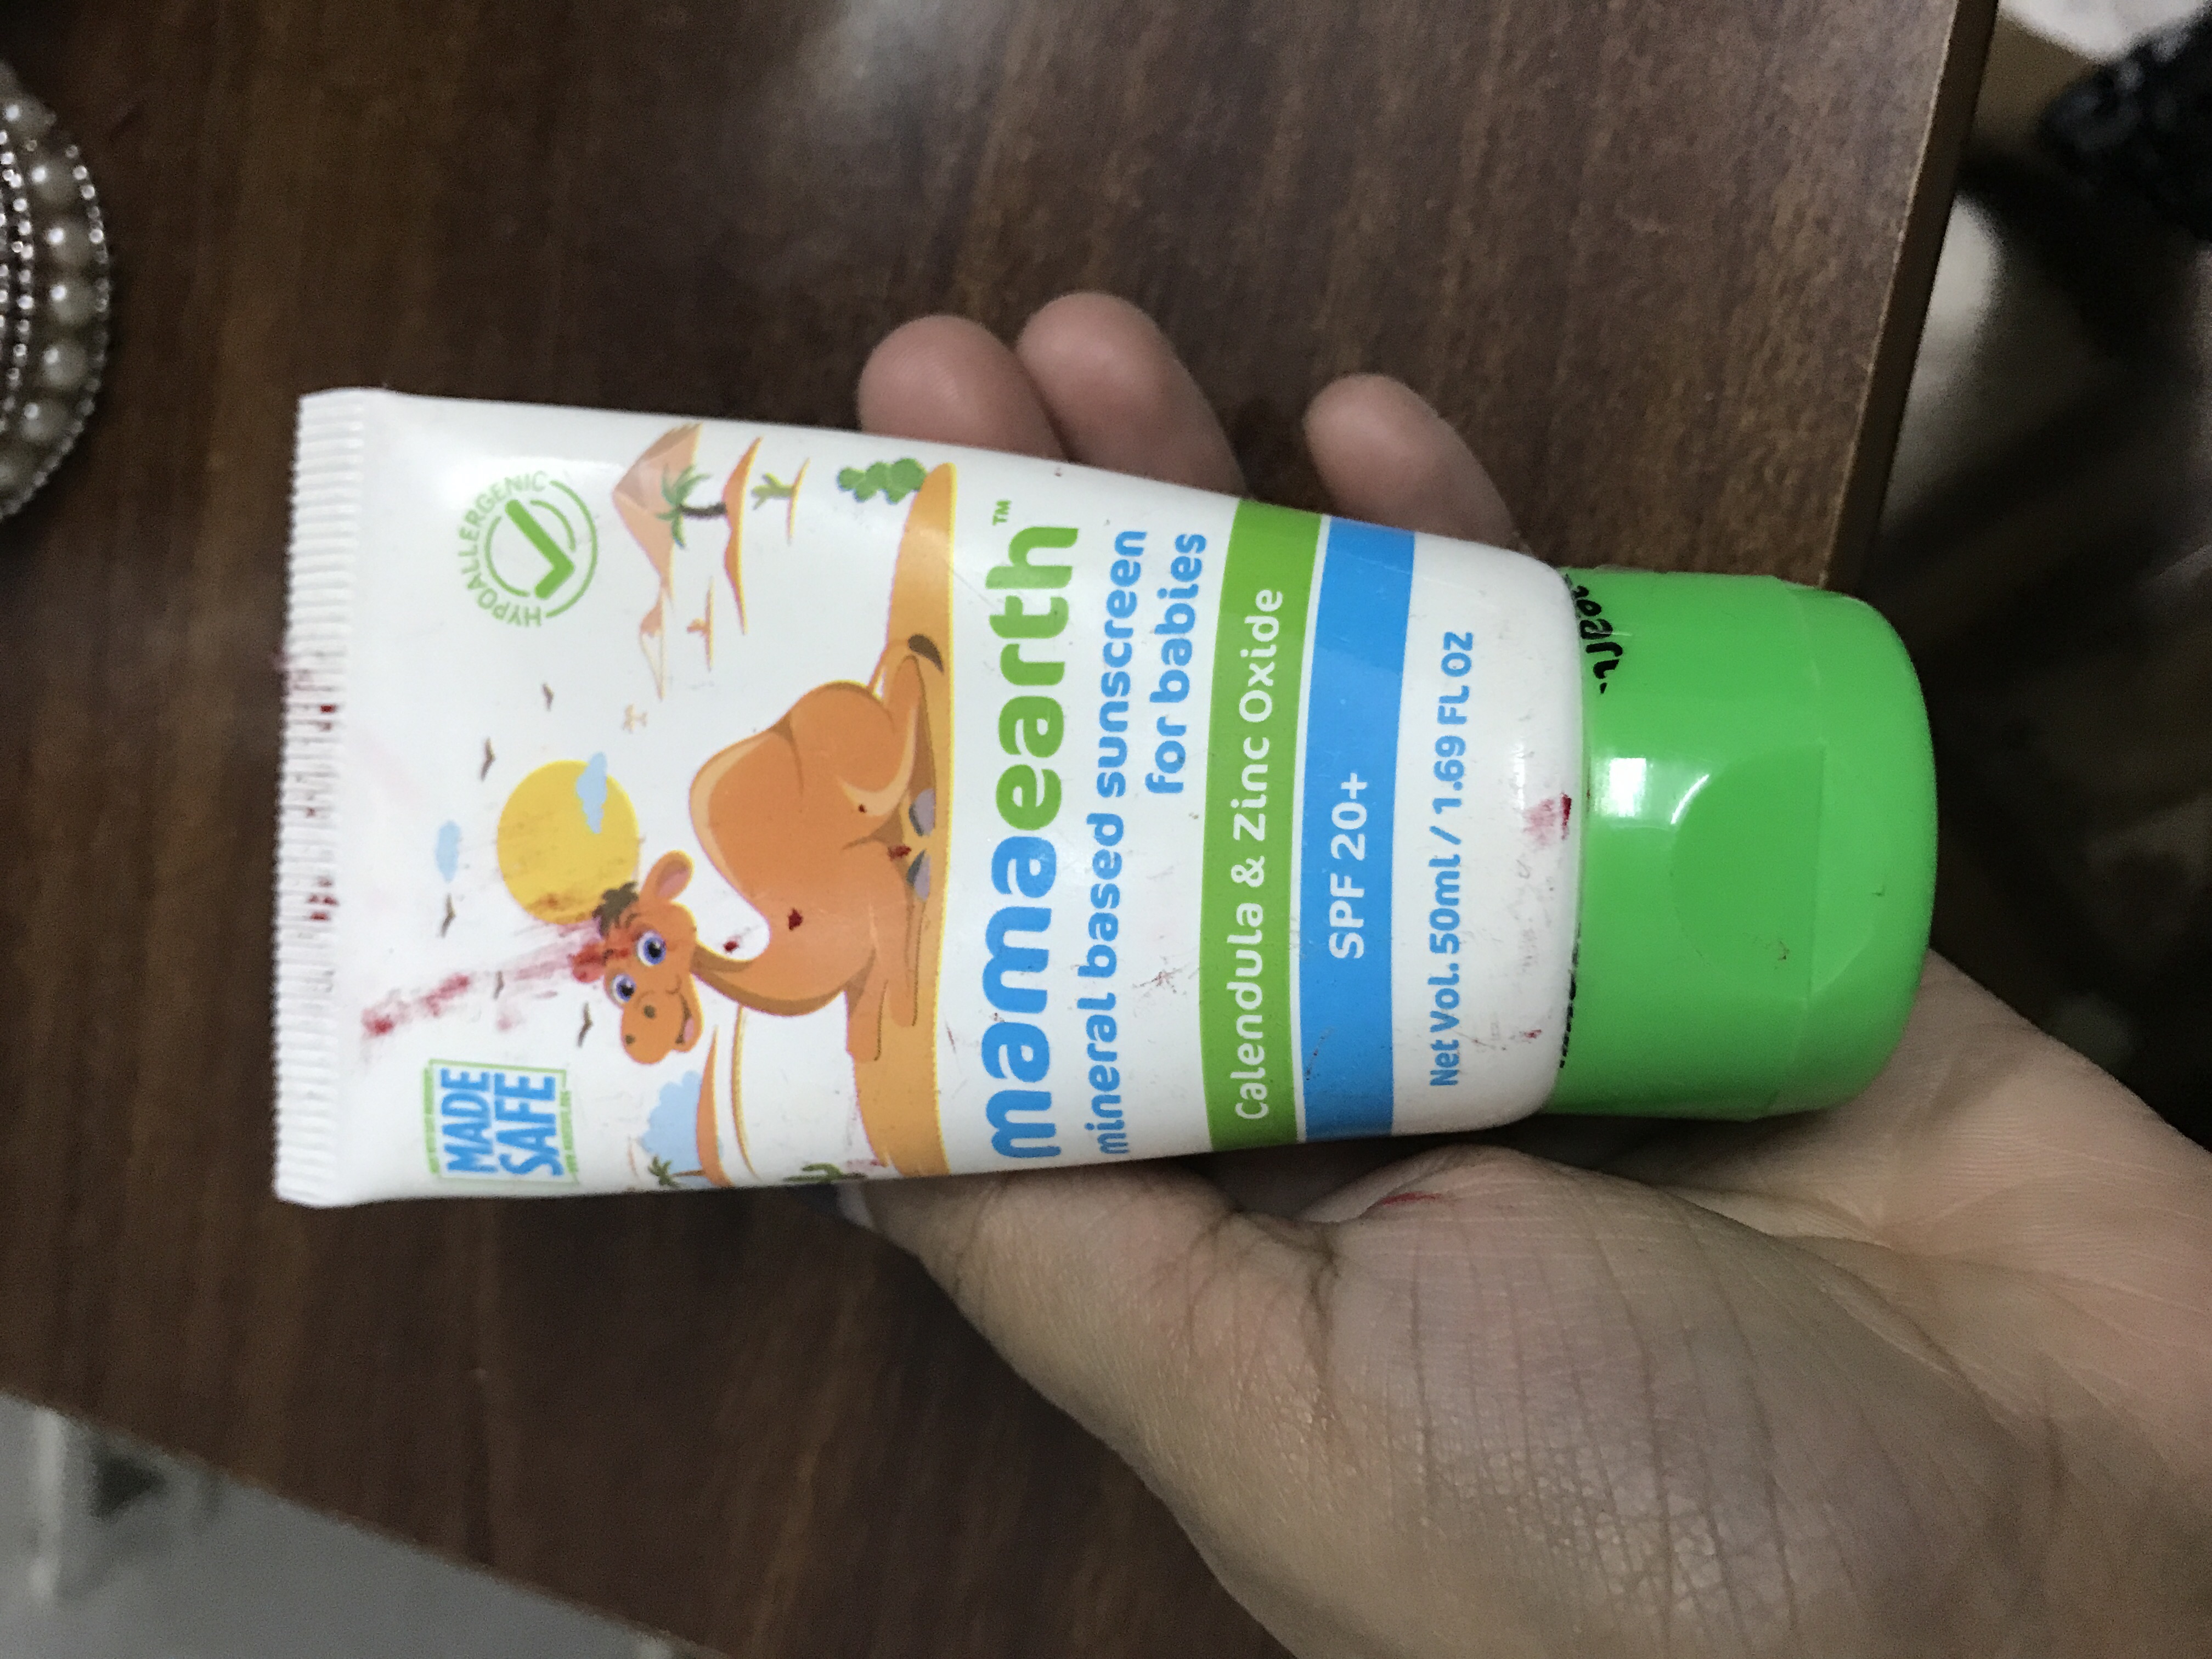 Mamaearth Mineral Based Sunscreen for Babies-Amazing product-By krati